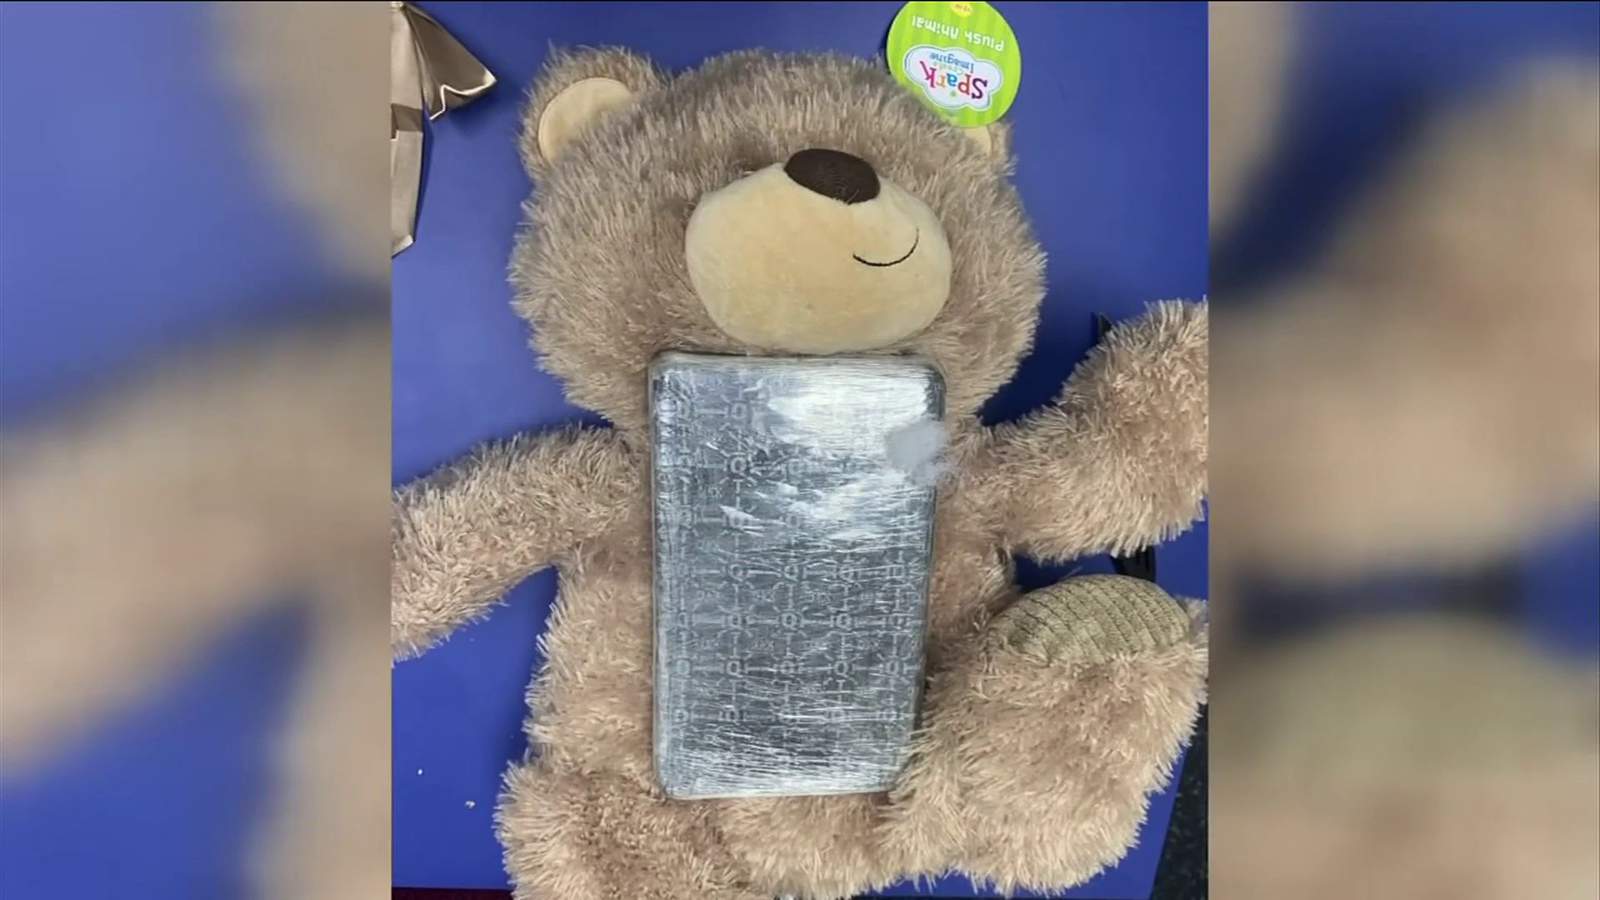 Teddy bears stuffed with cocaine lead to 3 arrests